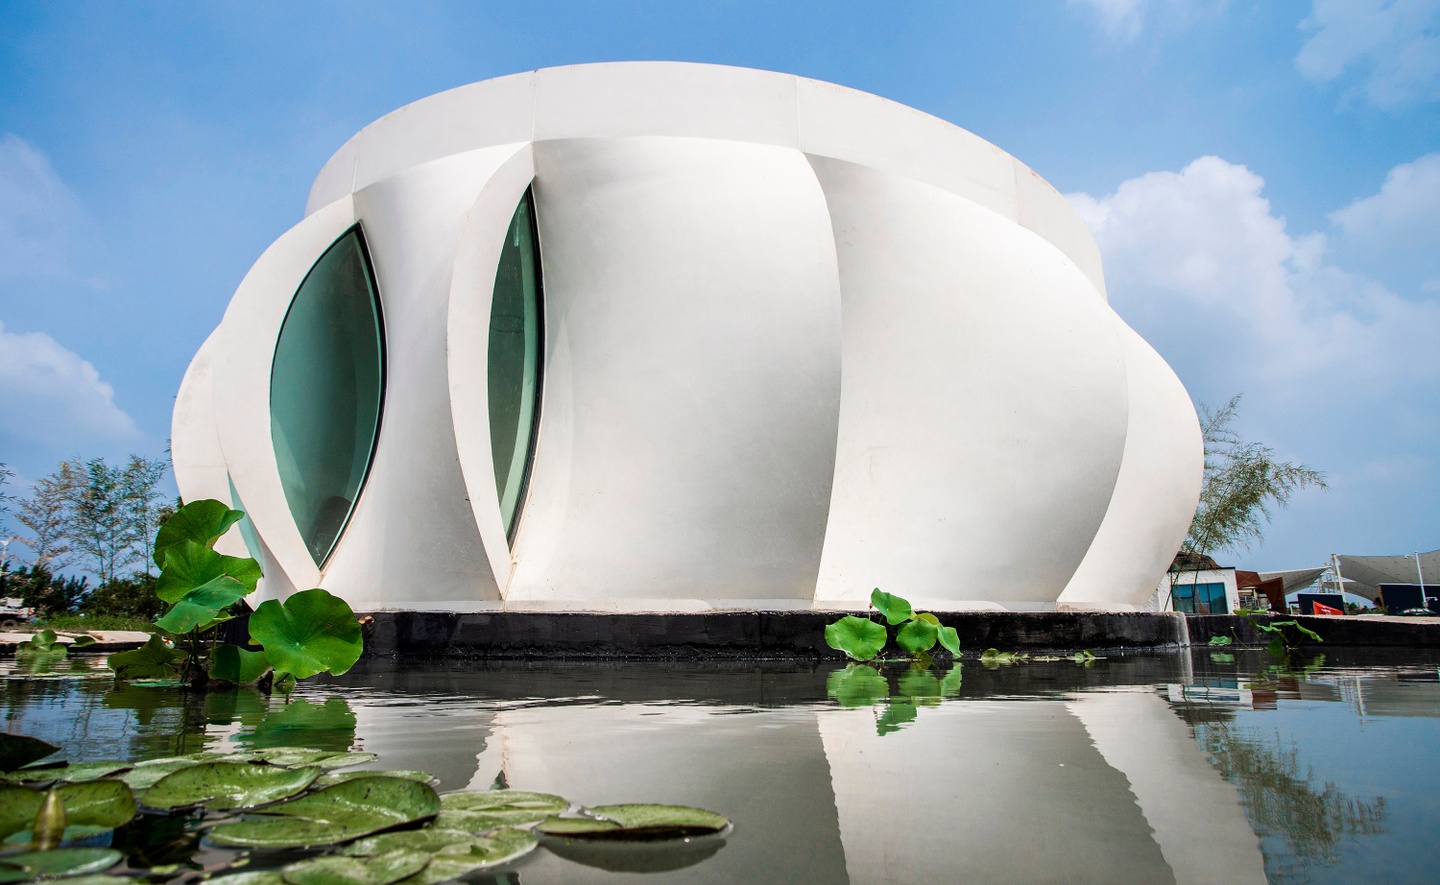 Photo of the exterior facade of a single-story home during the day. The exterior is composed of curved, overlapping panels, arrayed around a central axis like a blossoming flower. Water and lily pads are in the foreground, in front of the home.